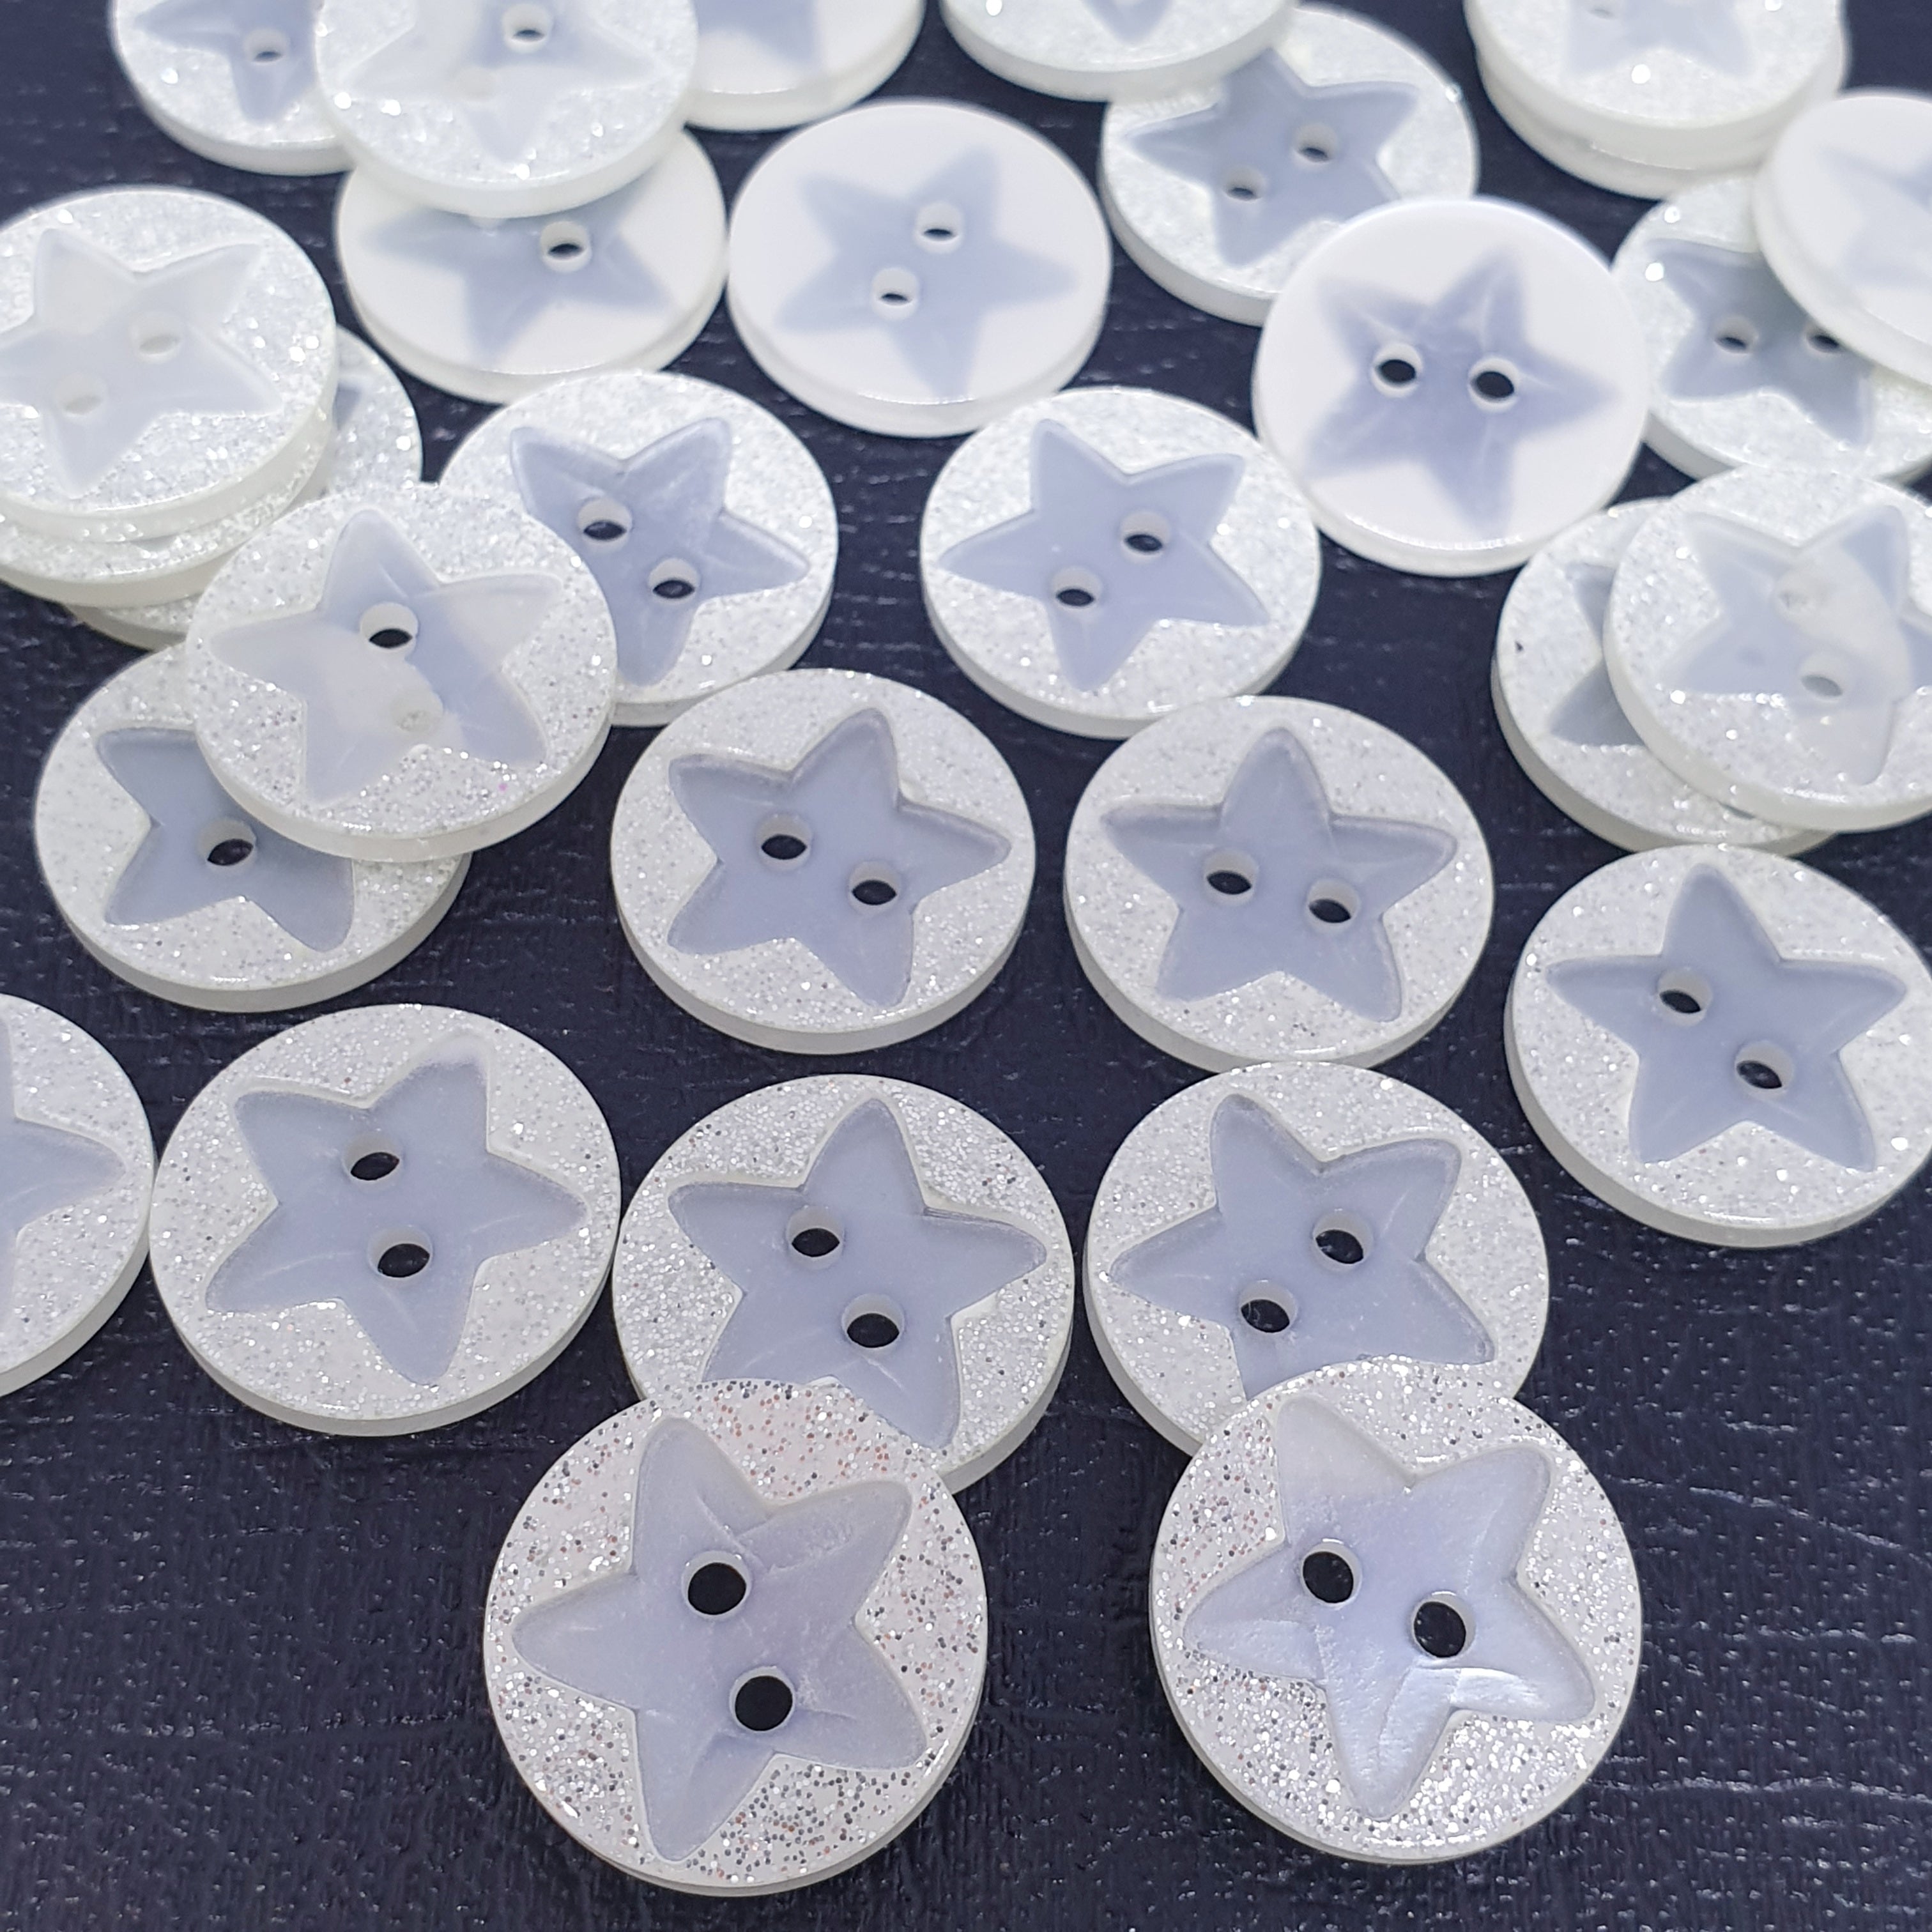 MajorCrafts 24pcs 18mm White Glittered 'Star Engraved' 2 Holes Round Sewing Resin Buttons